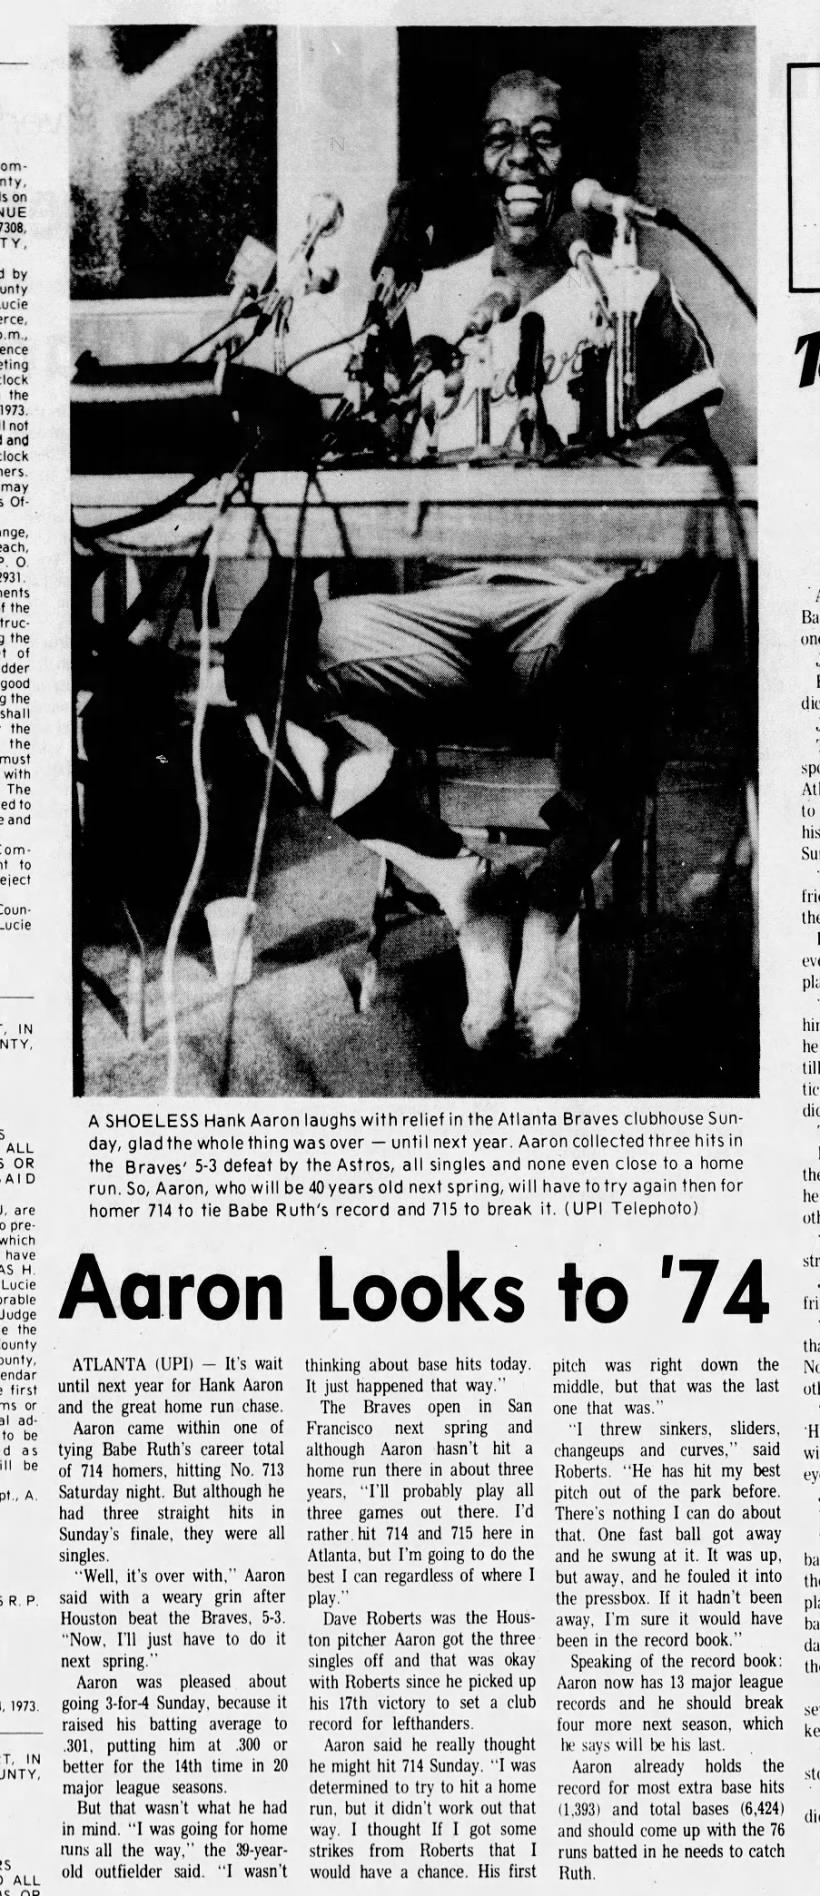 Hank Aaron at 713 to end 1973